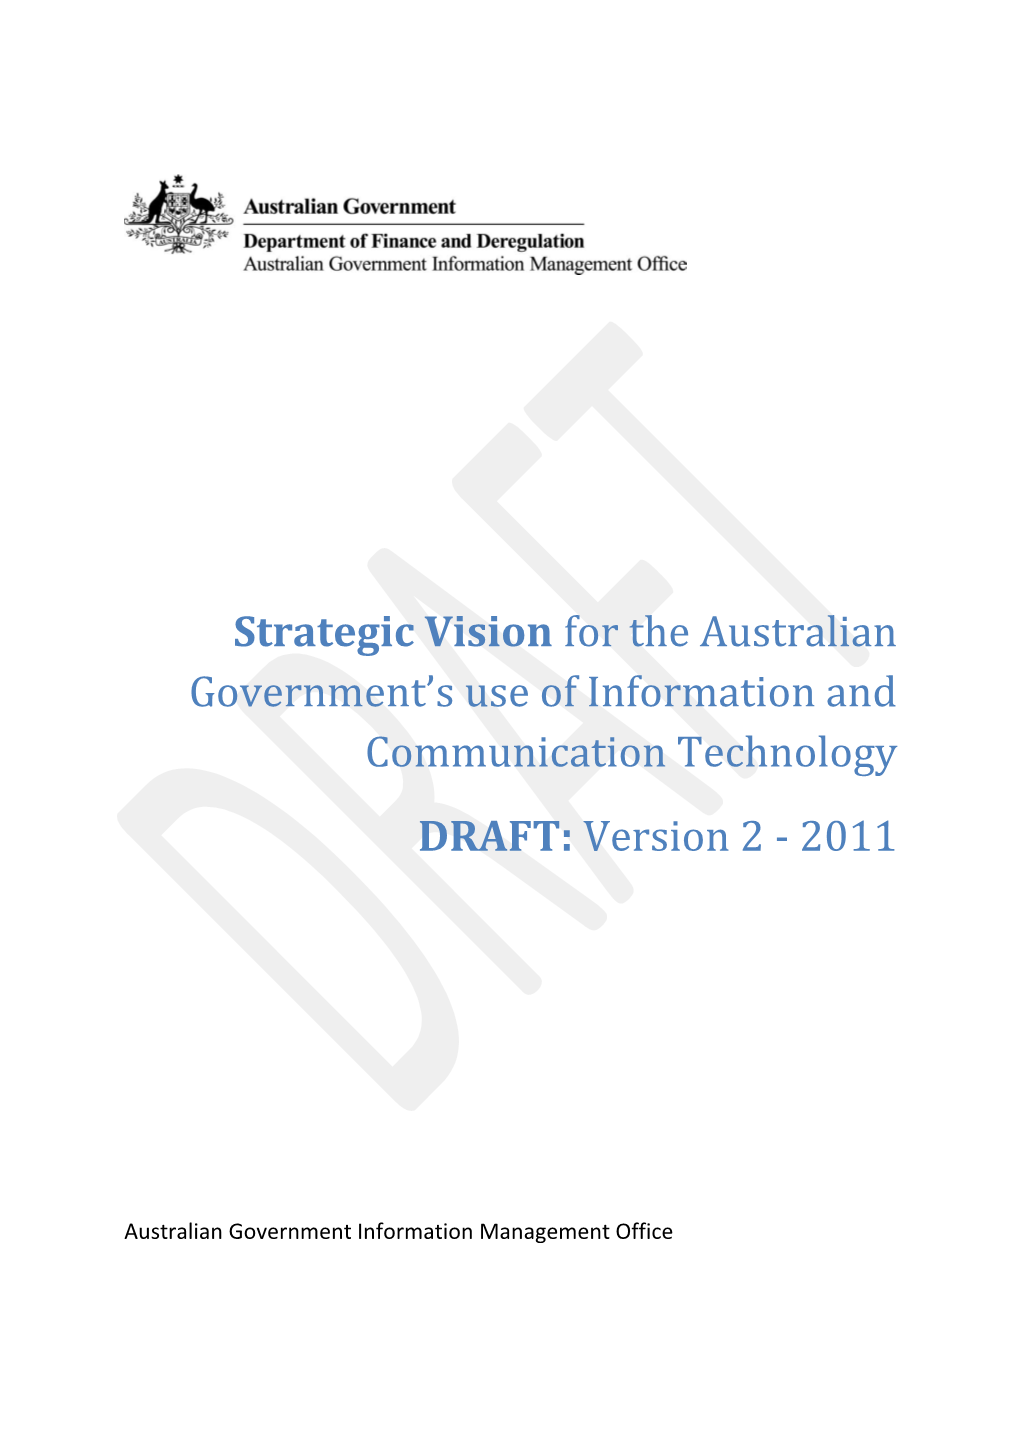 Draft Strategic Vision for Australian Government Use of Information and Communication Technology